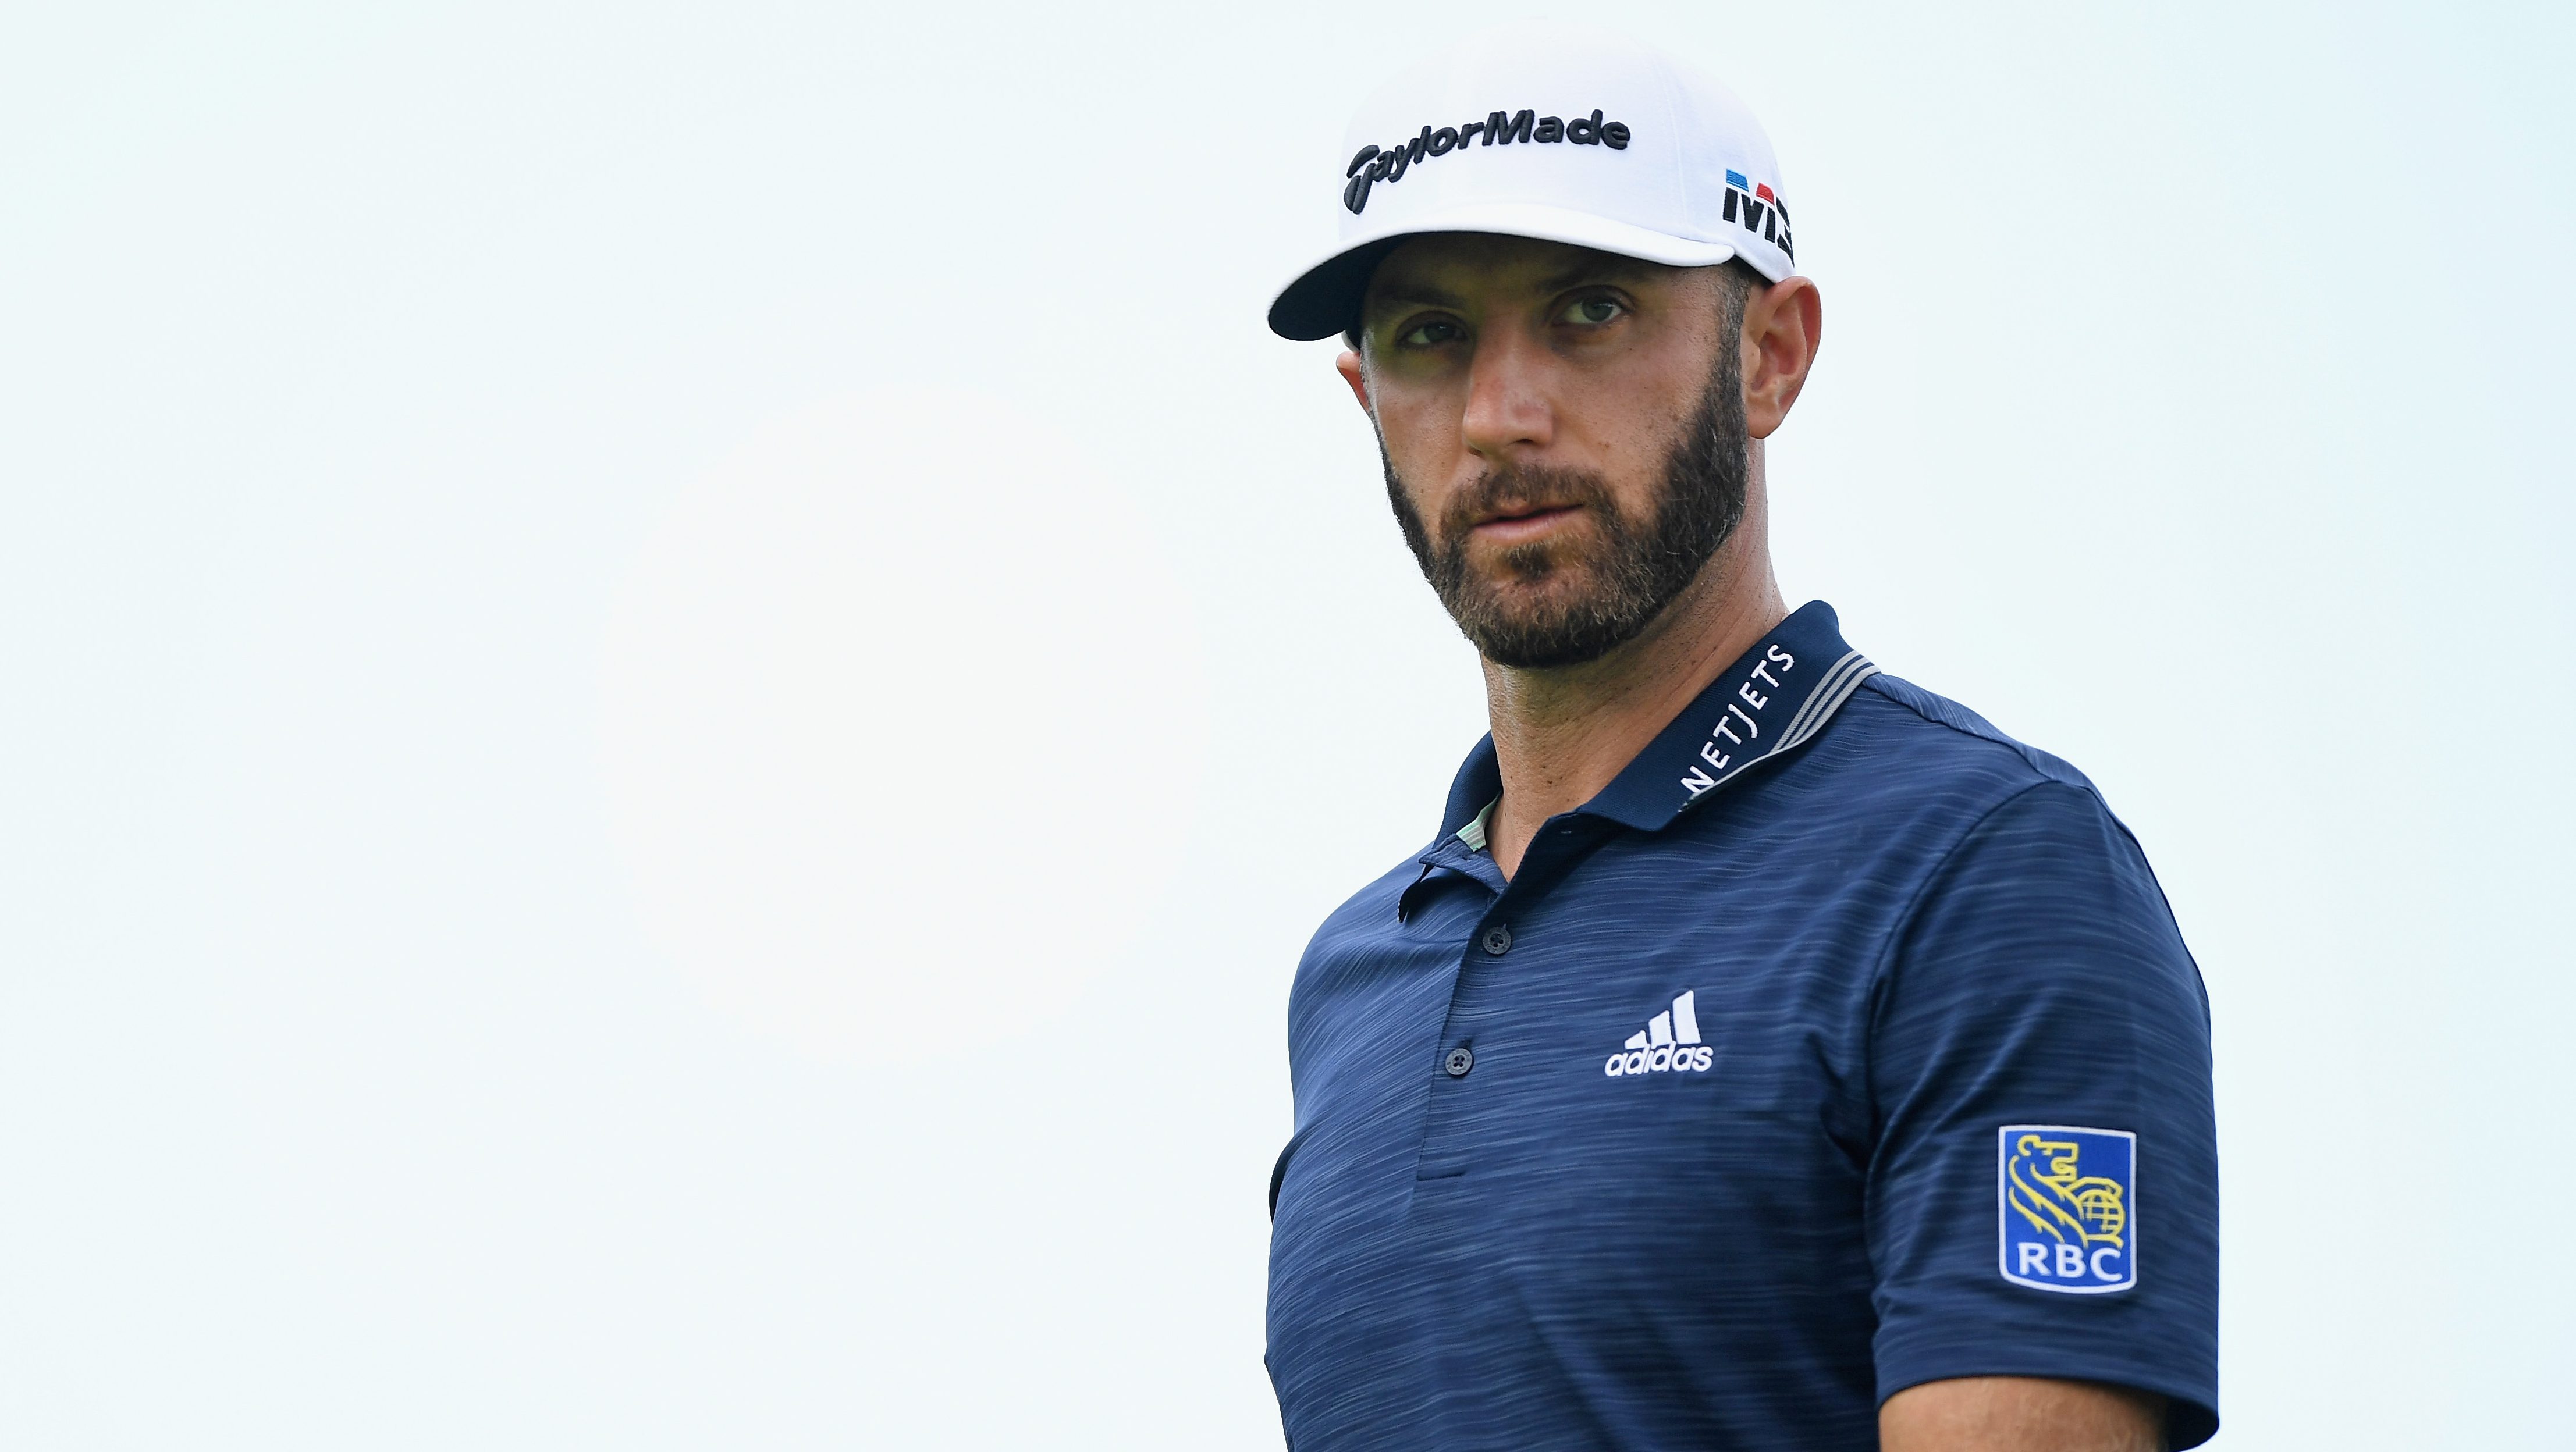 RBC Canadian Open Purse How Much Does the Winner Make?